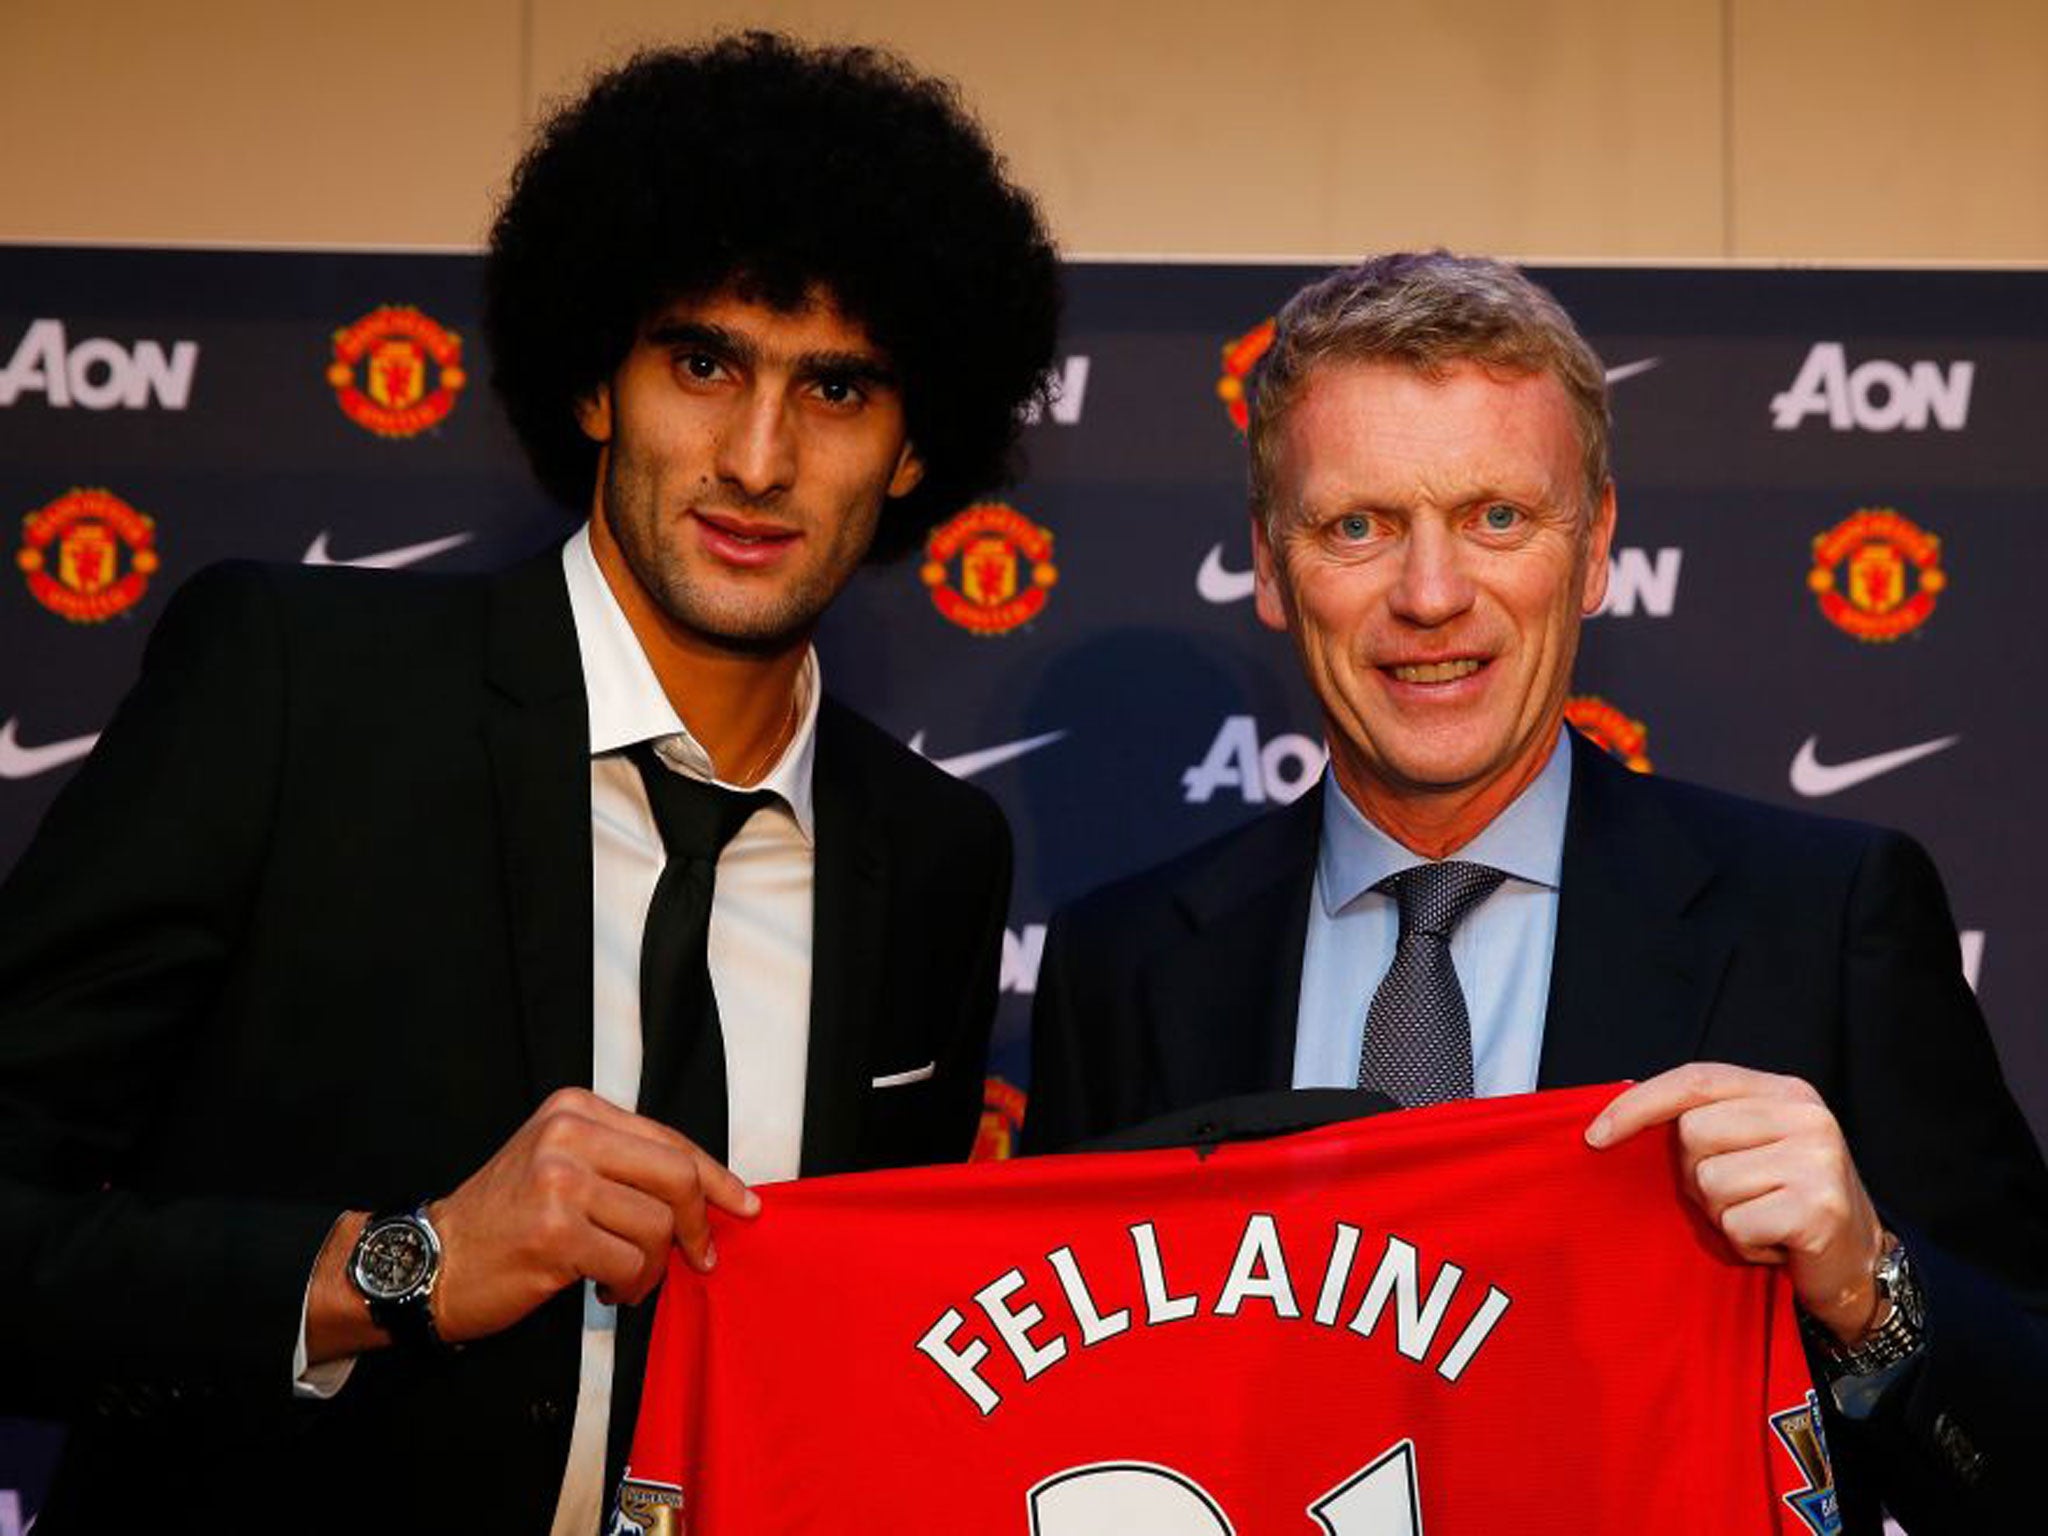 5. Marouane Fellaini (Man United, v C Palace, Saturday) Manchester United&#x2019;s megastore can be expected to have a new range of Felli &#x2018;Fro wigs on show as they start recouping the £4m overpaid for the Belgian giant, David Moyes having neglected to buy Fellaini when his release clause was operative. United&#x2019;s second most expensive player, after Rio Ferdinand, will be expected to make a quick impact.